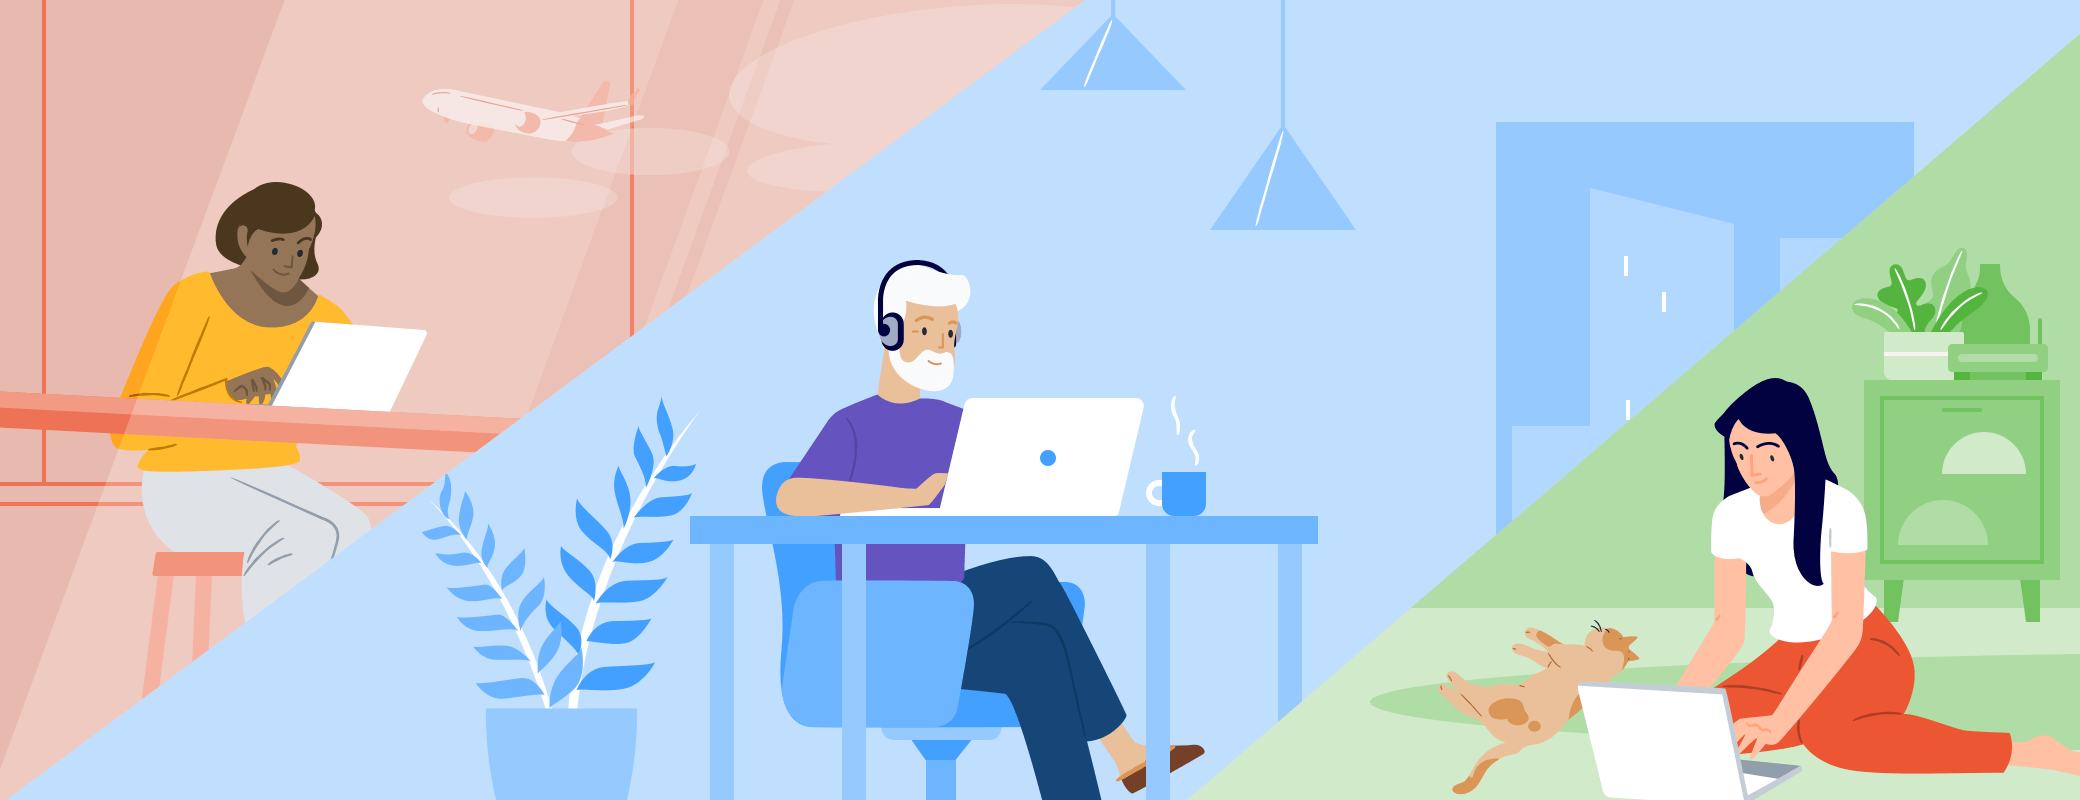 Reinventing Corporate Culture: Remote Work’s Impact on Company Values